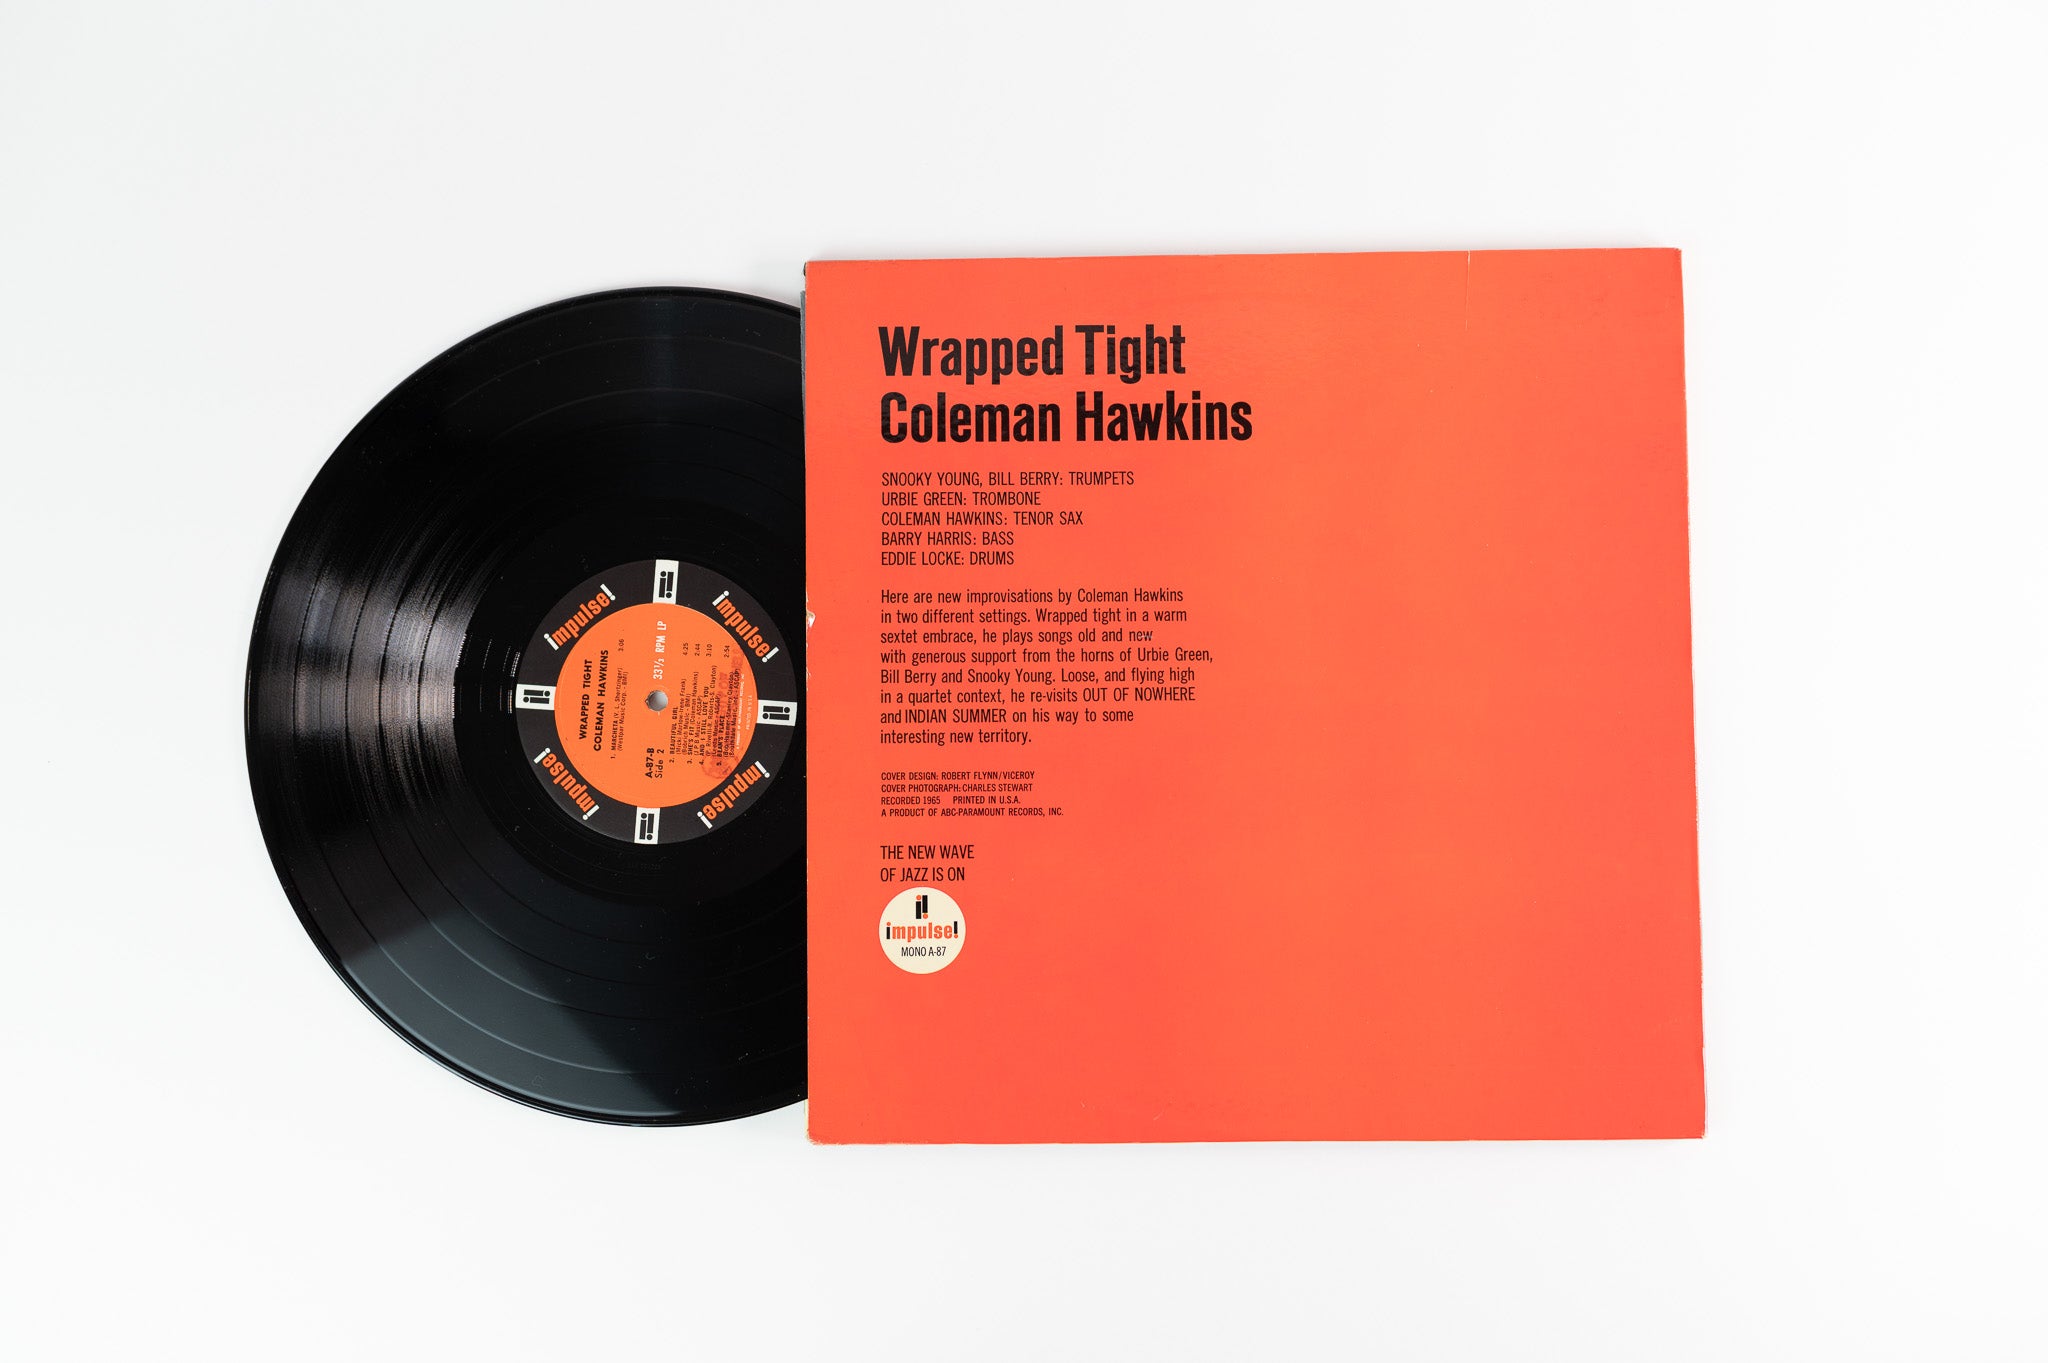 Coleman Hawkins - Wrapped Tight on Impulse A-87 Mono